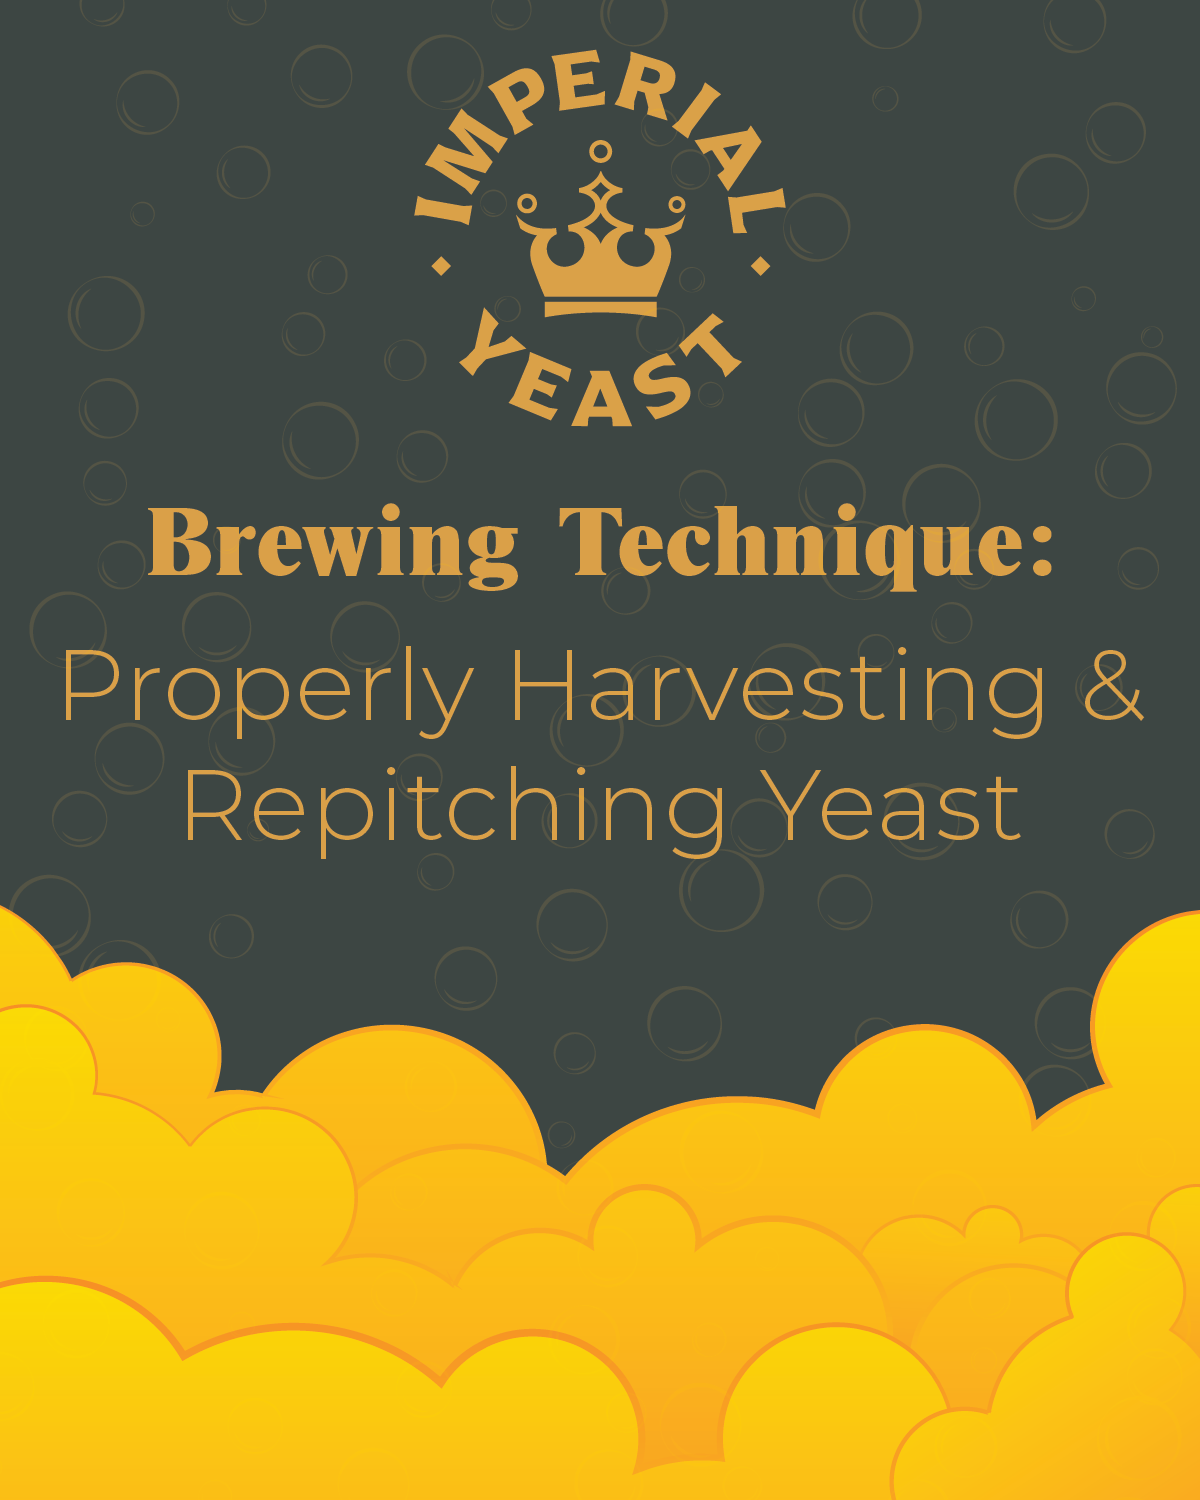 Photo of an Imperial Yeast production facility.